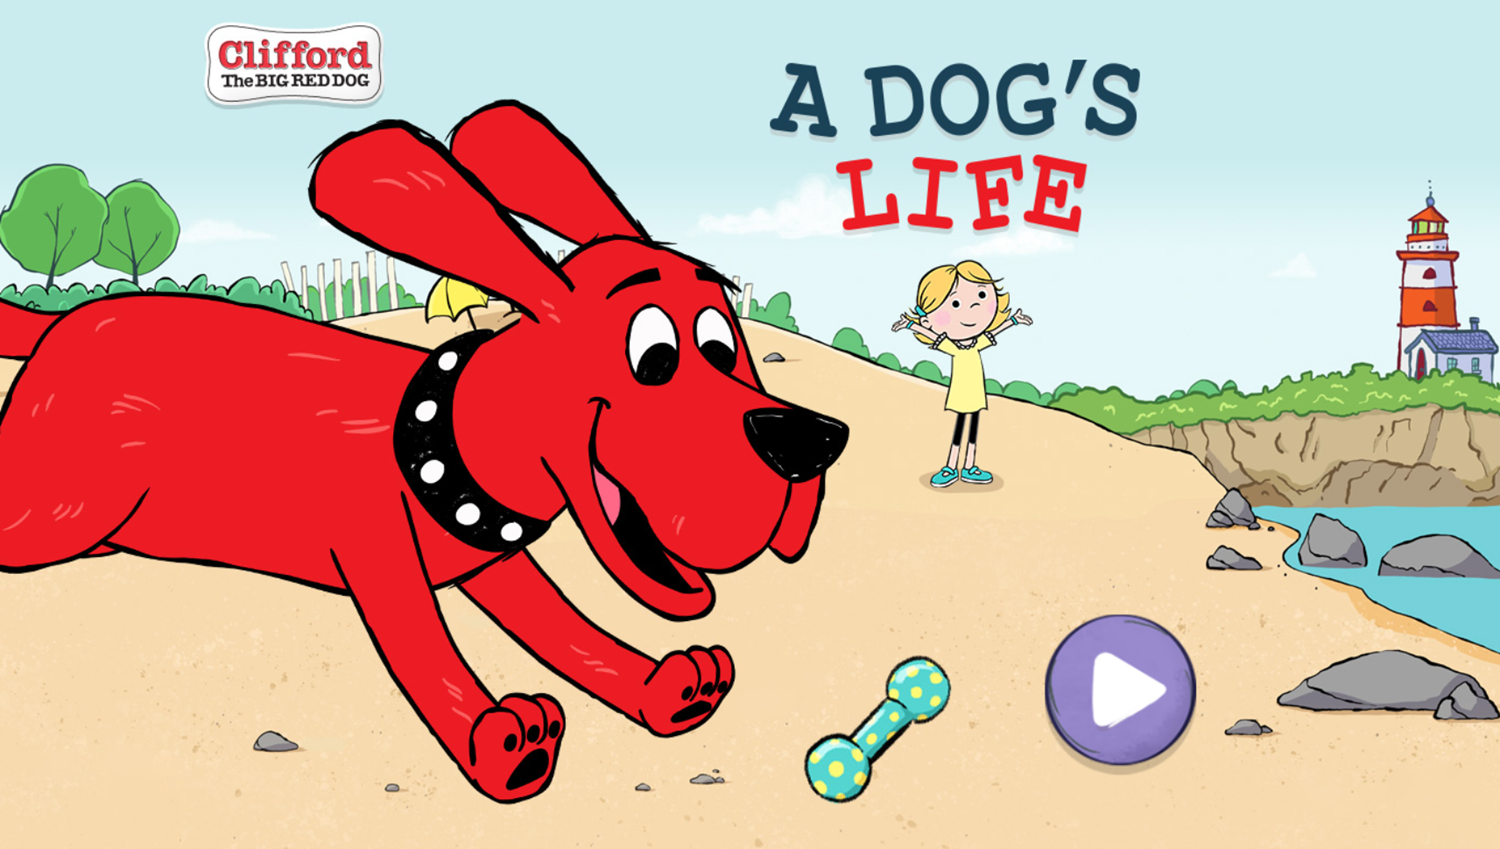 Clifford the Big Red Dog: A Dog's Life Welcome Screen Screenshot.